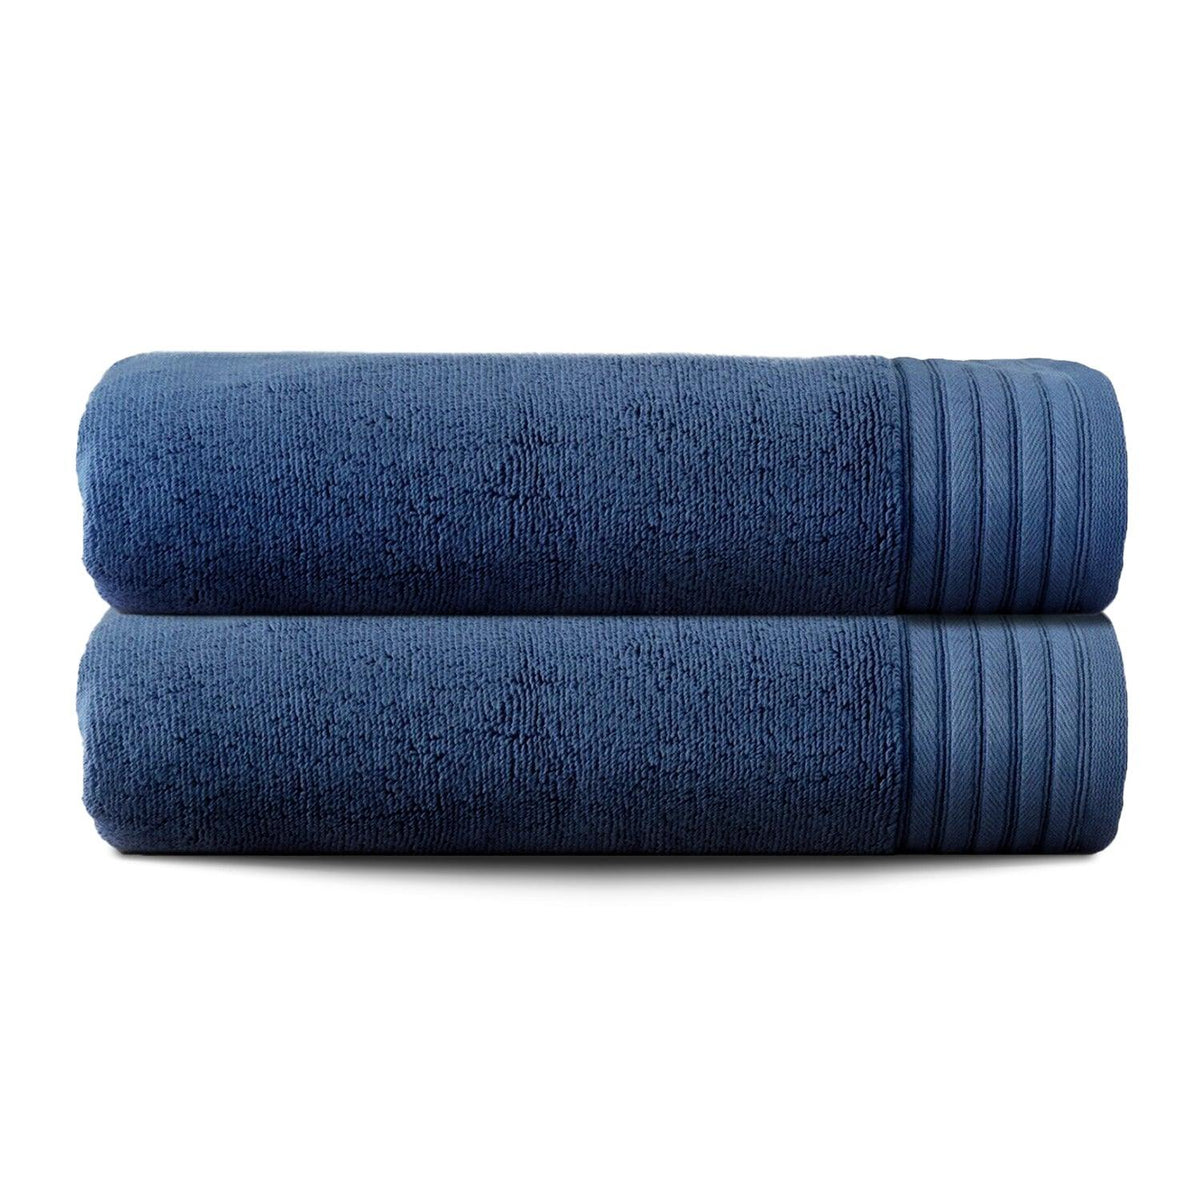 Egyptian Cotton Bath Towel Pack of 2